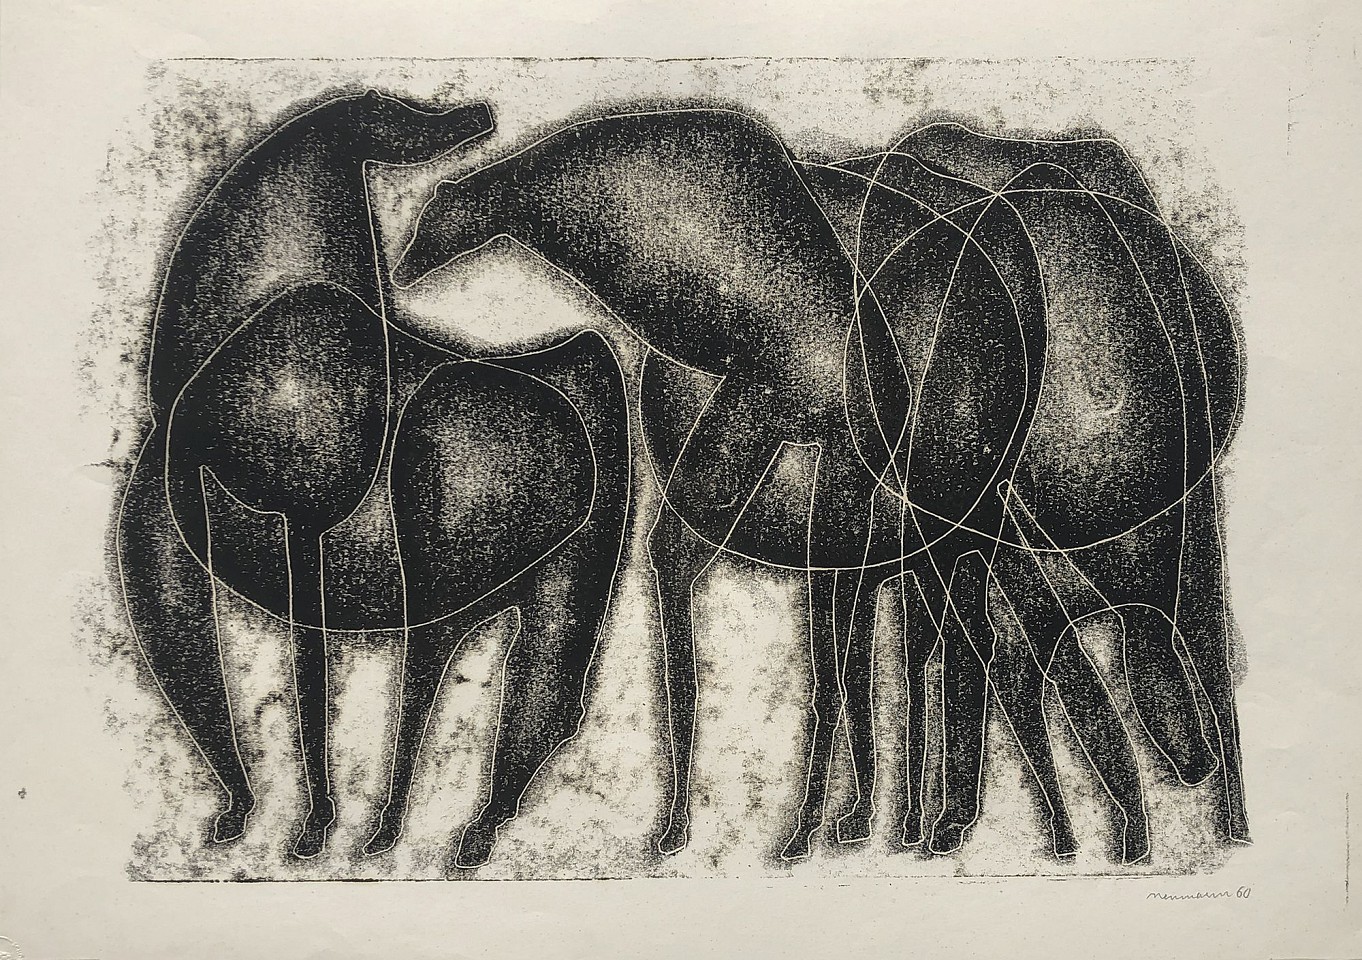 Otto Neumann 1895-1975, Abstract Horses, 1960
monotype on paper, 17.625" x 24.625",26" x 33" framed 
OT 045014
$9,900